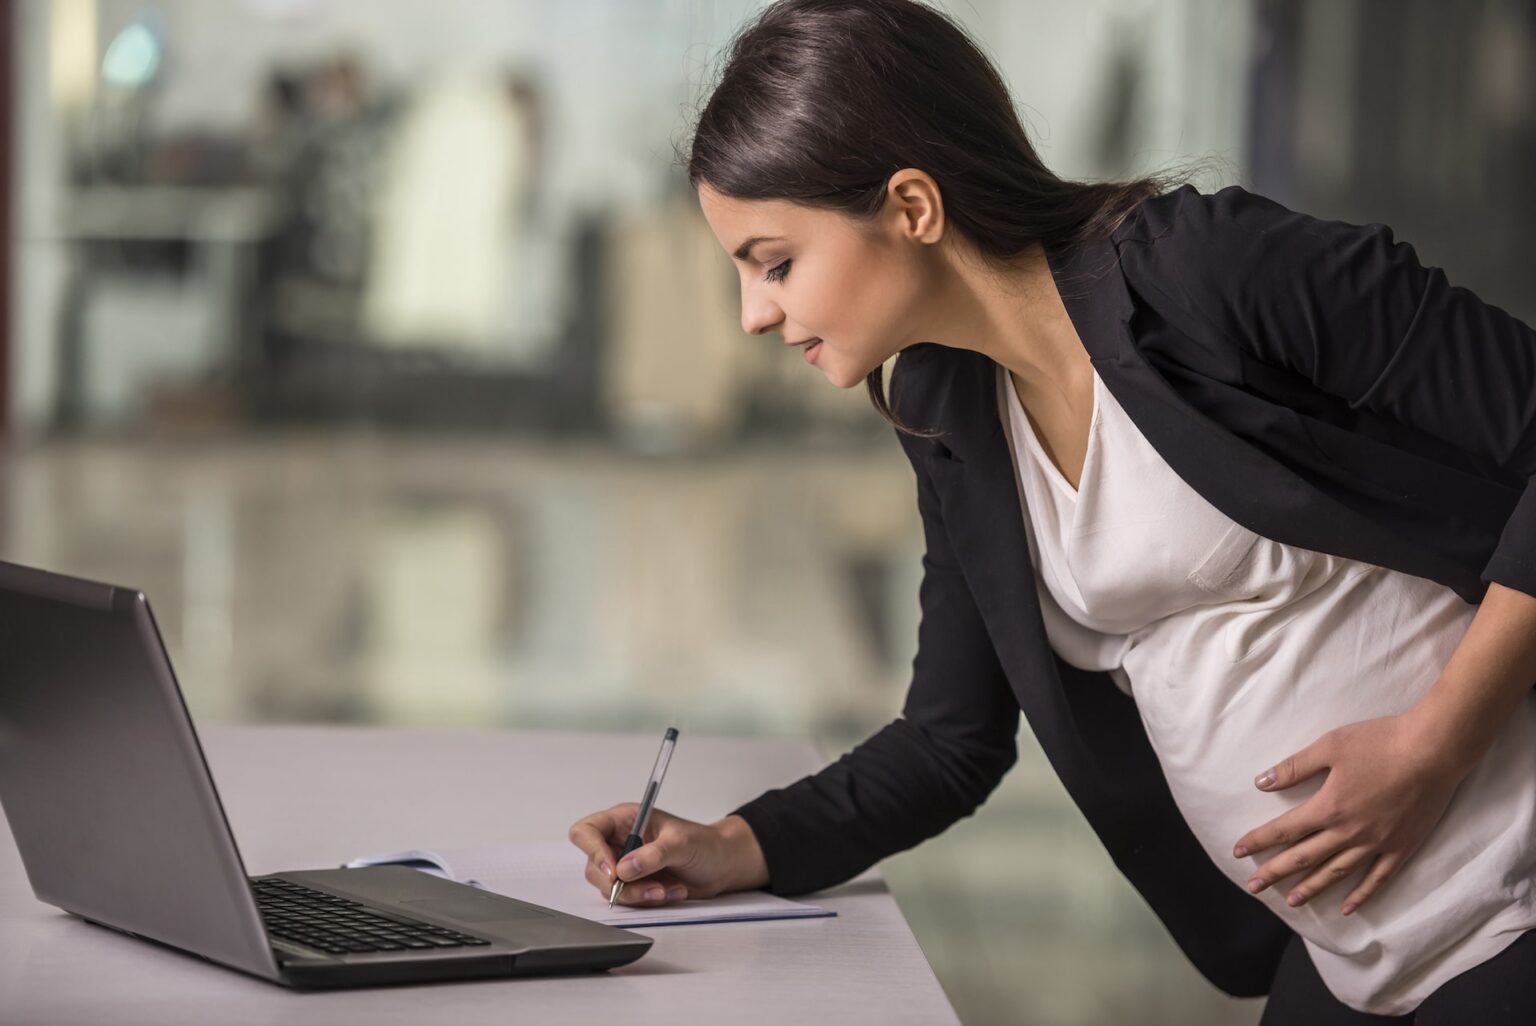 What to do if one of your employees is expecting baby? This could be a delicate situation, discover the best way to handle it in this article.